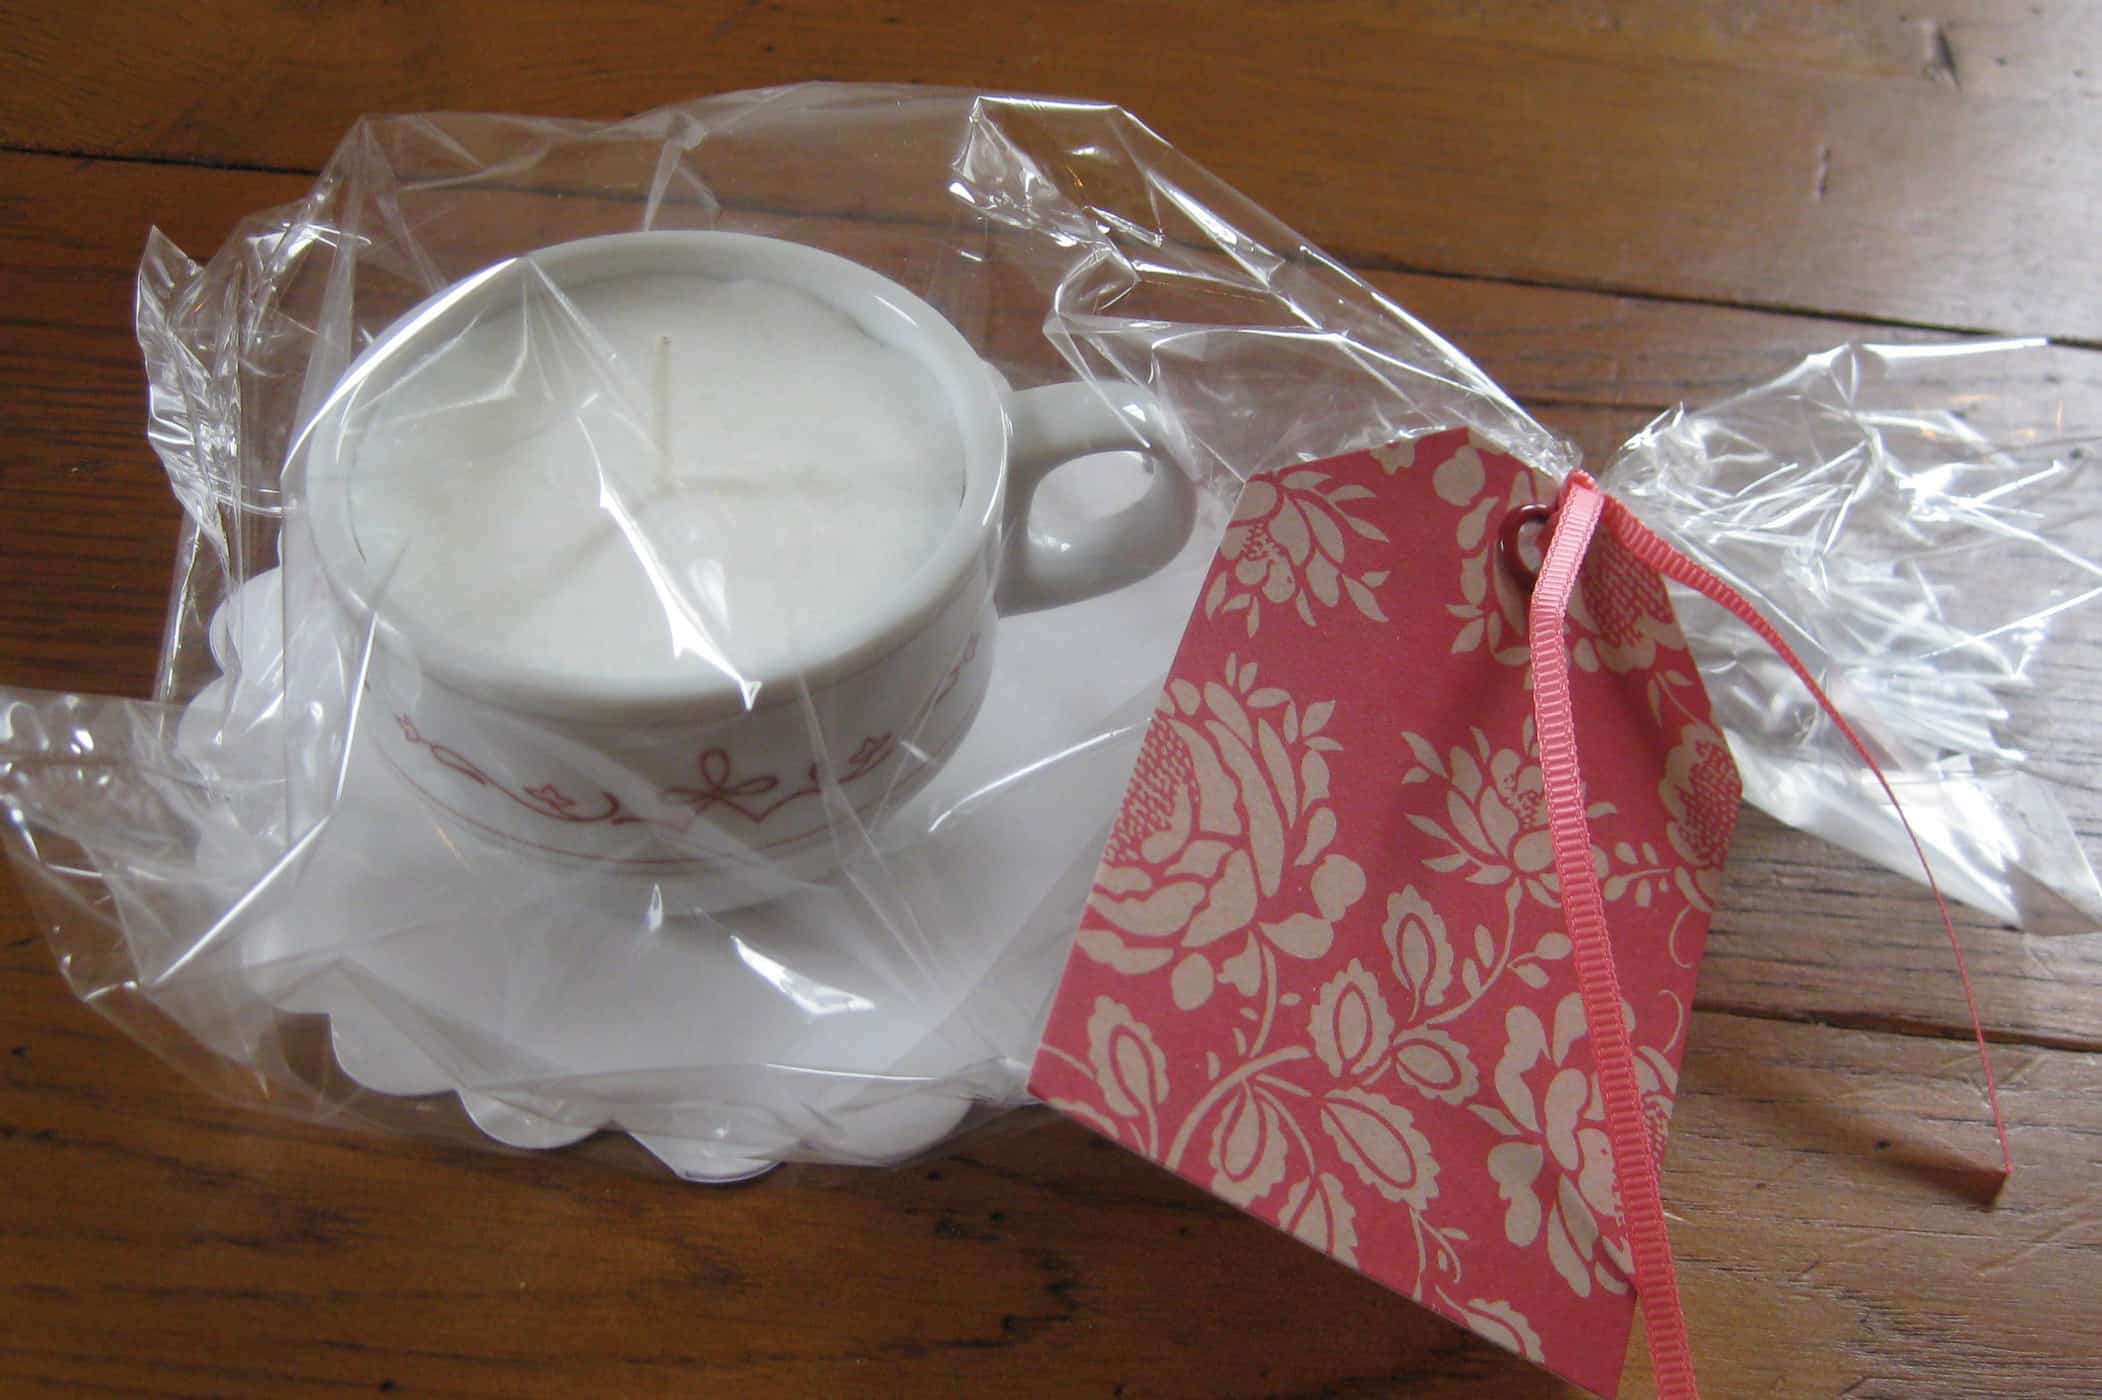 how to make a candle in a teacup, container candle gift idea